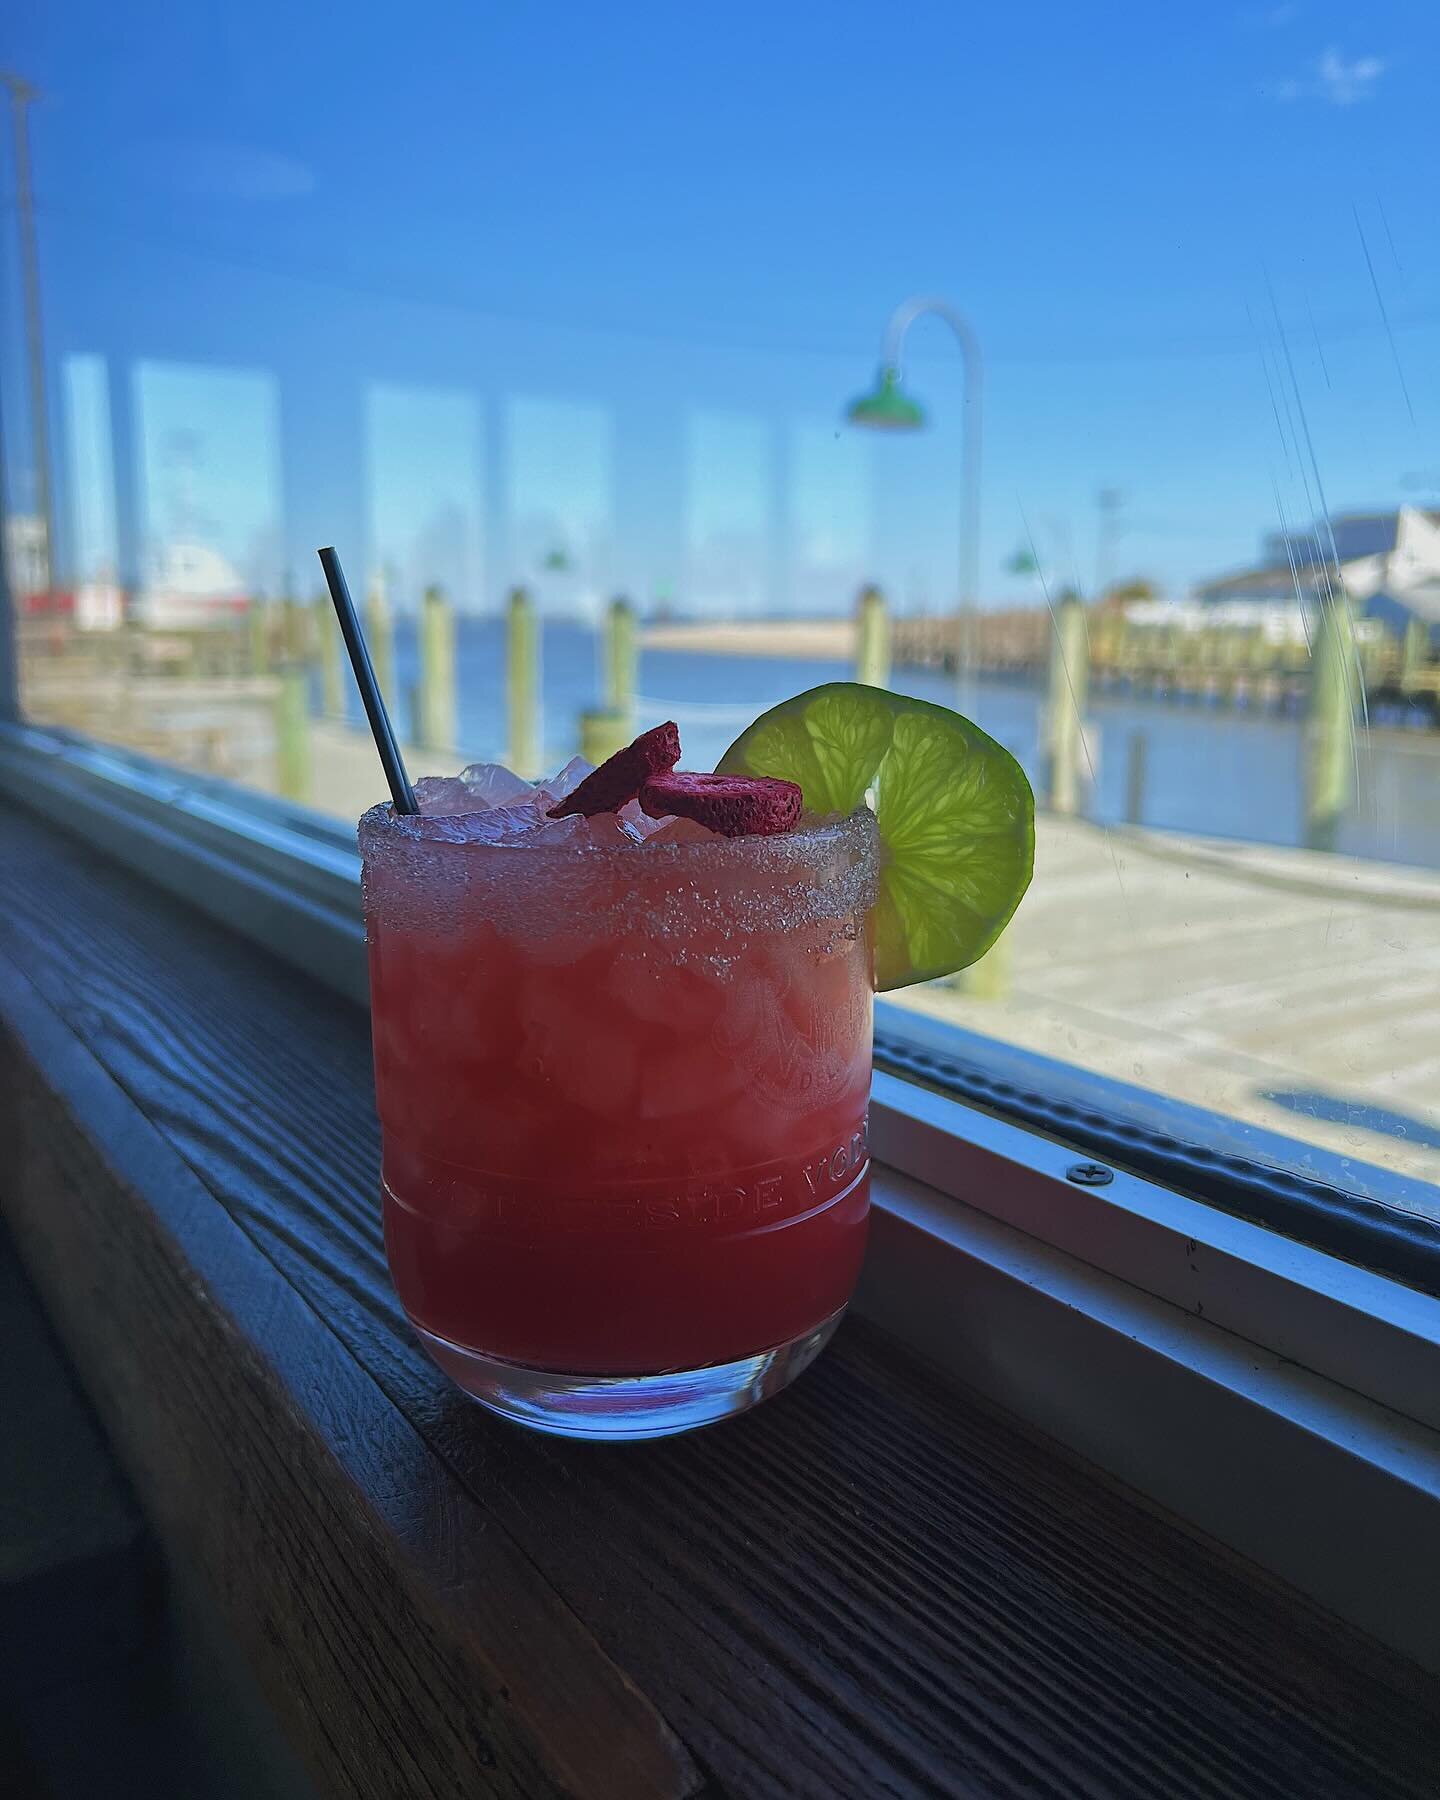 The weather this week has us dreaming of warm summer days ☀️ Enjoy some cocktails &amp; fresh seafood with us this week! Opening at 5pm this evening, see you tonight!